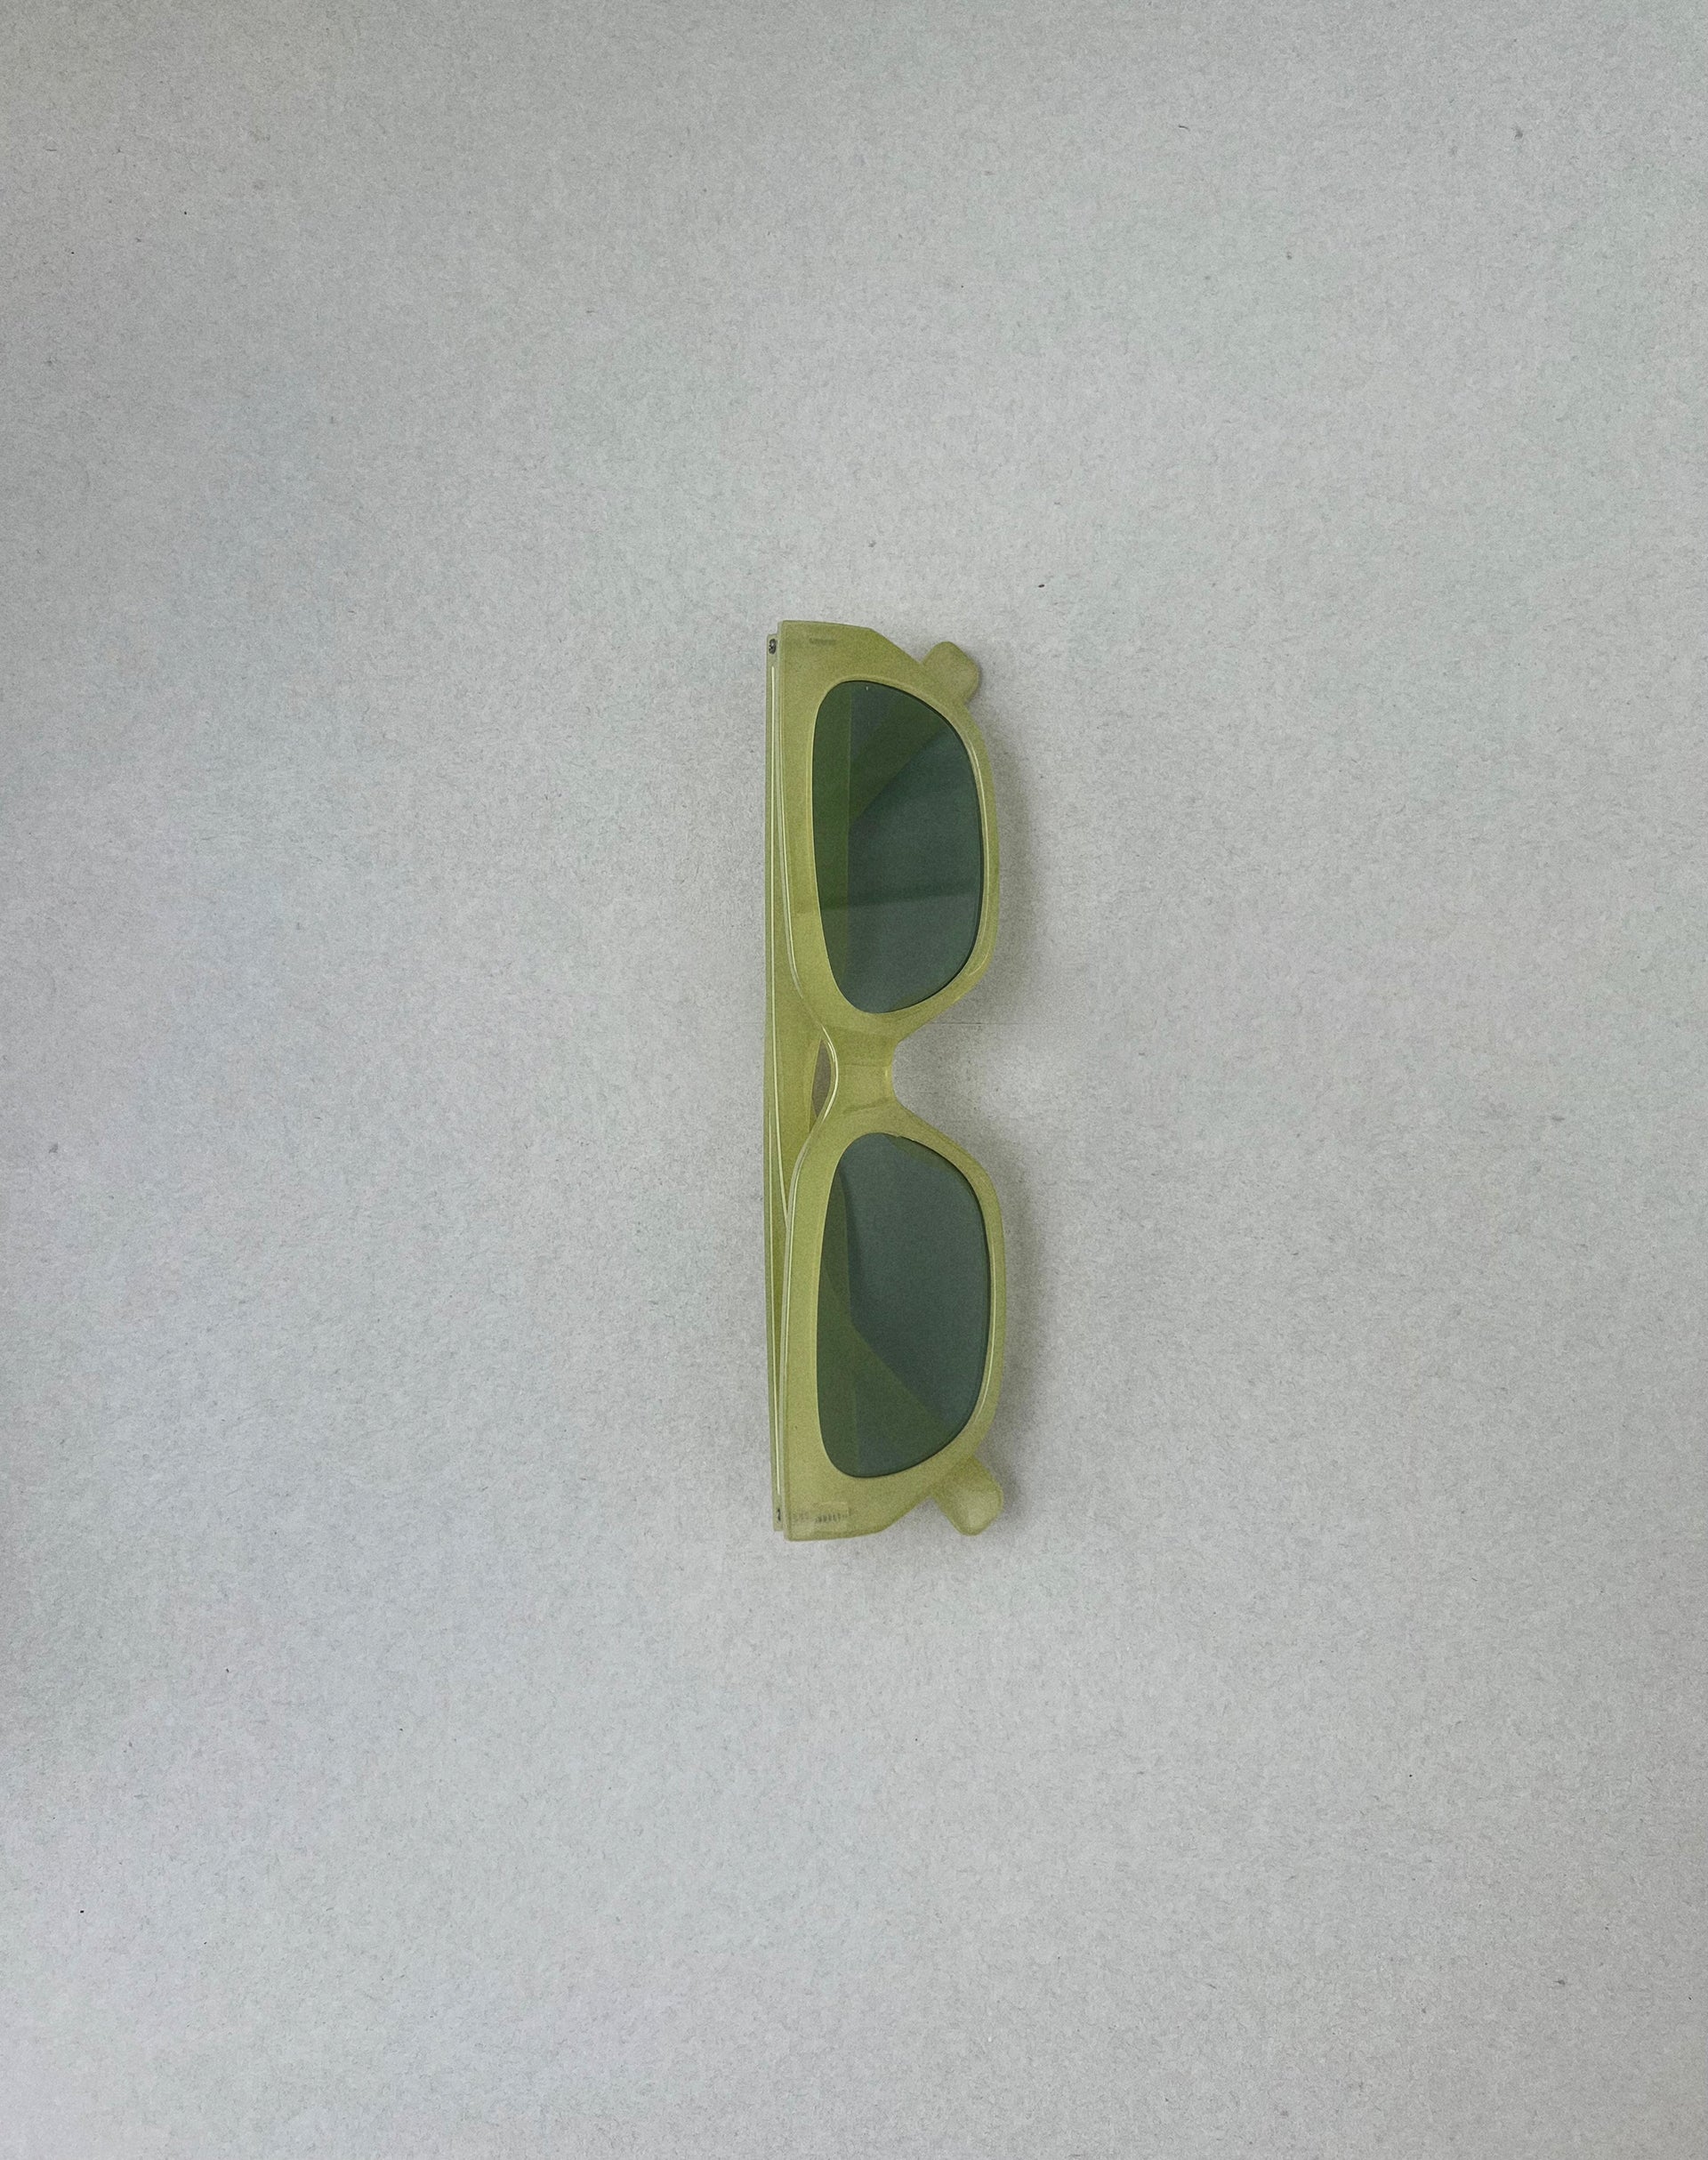 image of Amiah Rectangle Sunglasses in Light Green